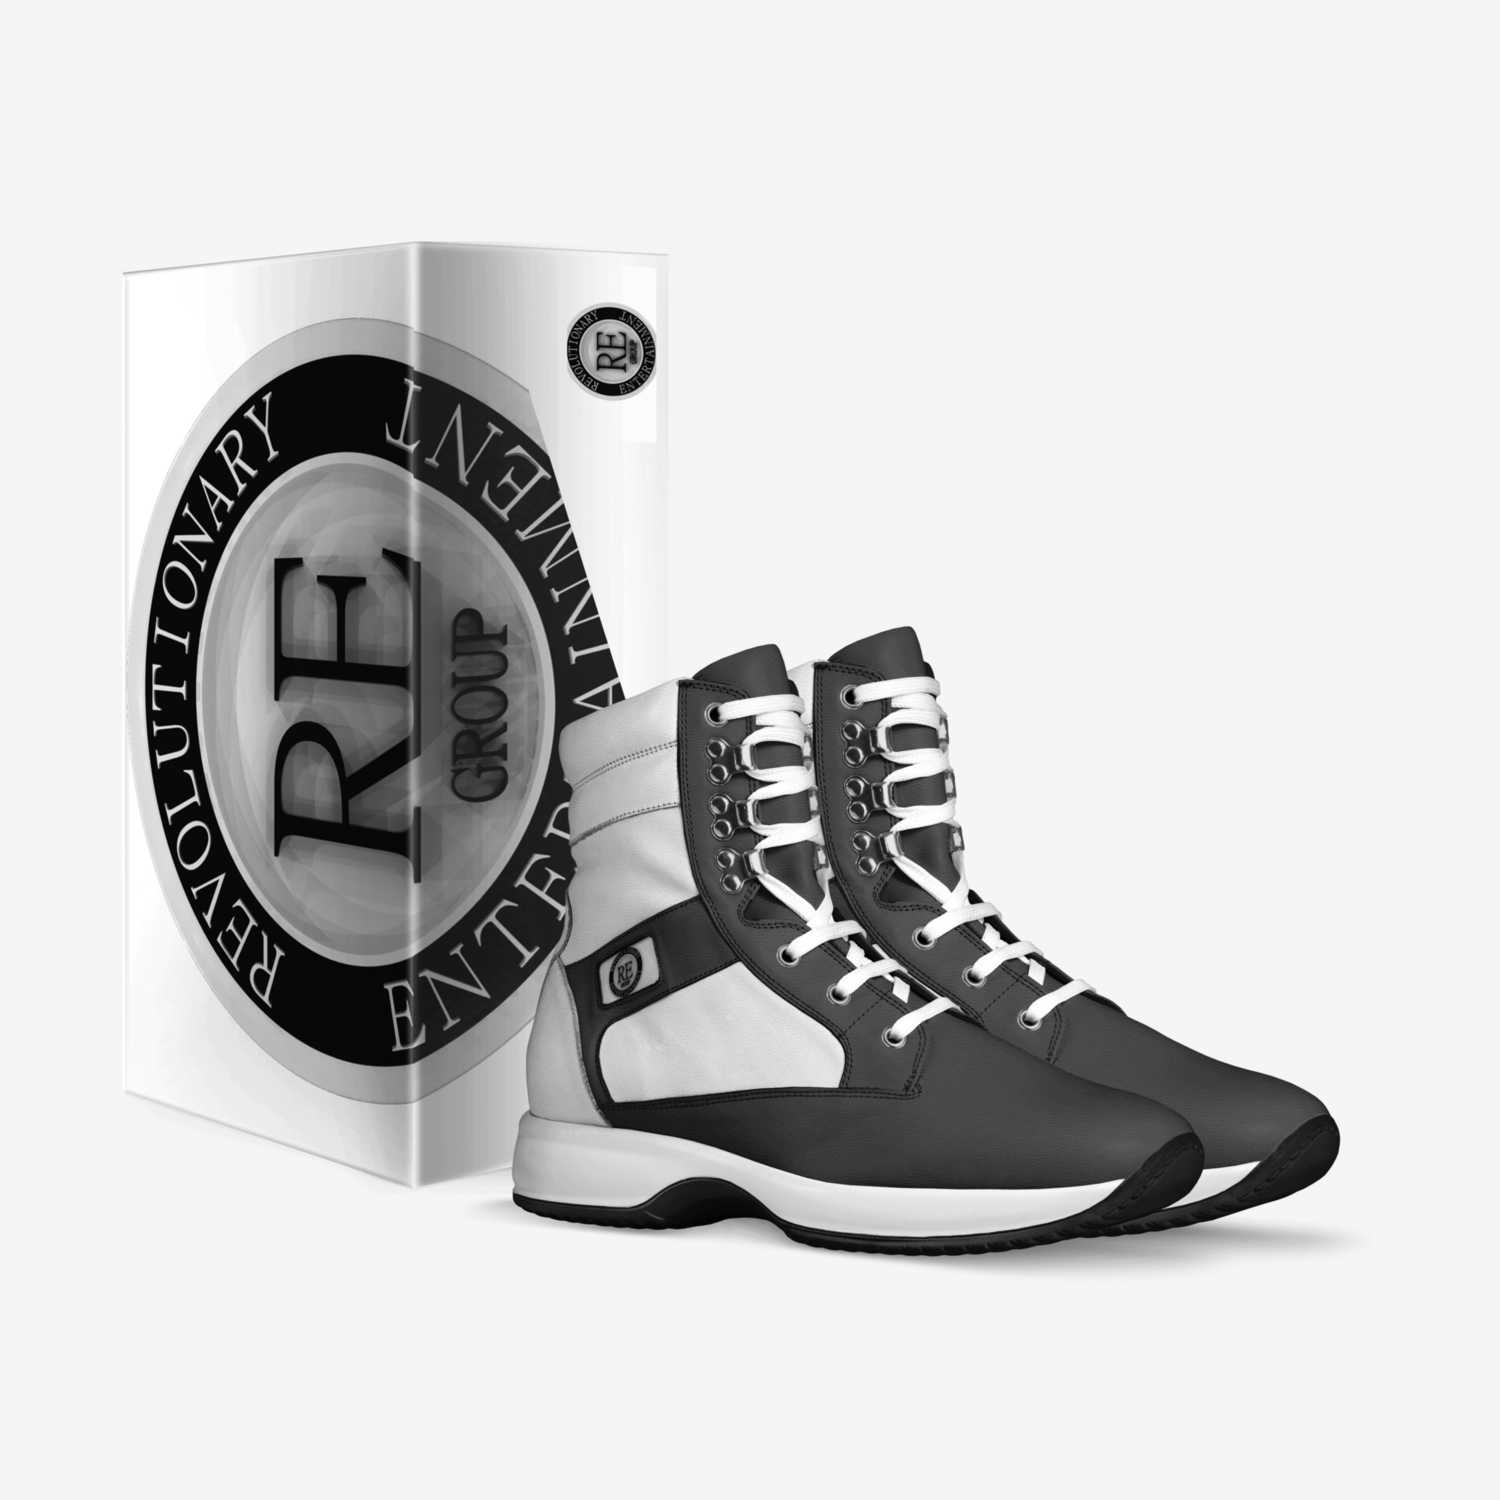 The Revolution 2's custom made in Italy shoes by Zackrey Ceasar | Box view